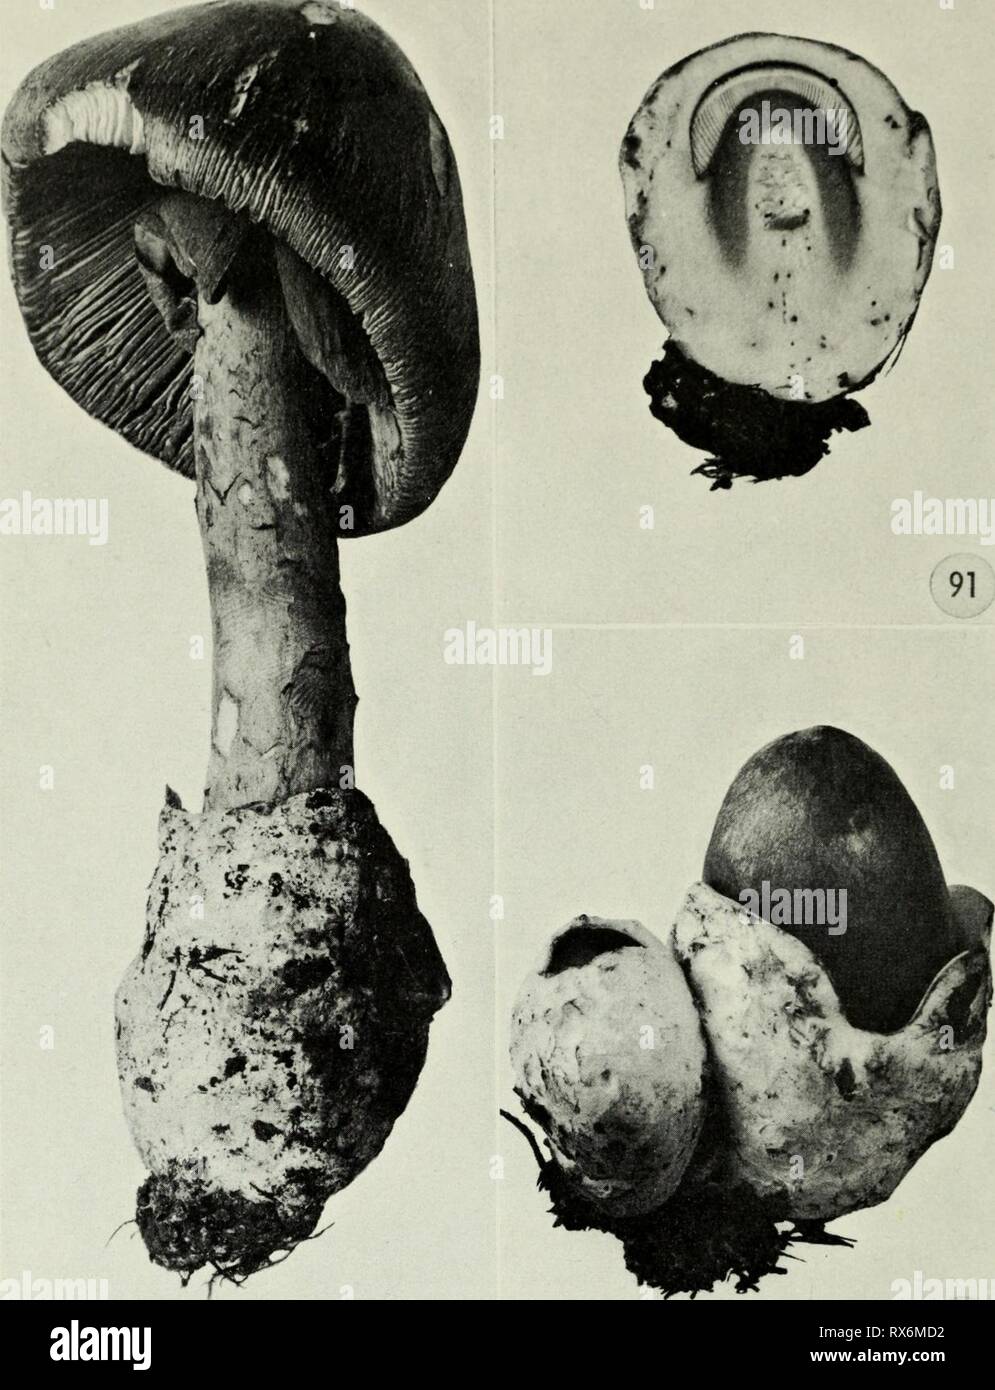 Edible and poisonous mushrooms of Edible and poisonous mushrooms of Canada ediblepoisonousm00grov Year: 1979  I I 90 V 92 Figures 90-92, Amanita caesarea. 90, mature plant, note loose membranous volva; 91, section of young plant before volva has ruptured showing outline of young fruiting body within the volva; 92, young plants showing ruptured volva with young fruiting body emerging. 93. Russula densifolia. 95. R. emetica. 97. R.jallax. 99. R. joetens. 101. R. lutea. Figures 93-102 94. R. densifolia. 96. R. emetica. 98. R.flava. 100. R.fragilis. 102. R. nigricans. 48 Stock Photo